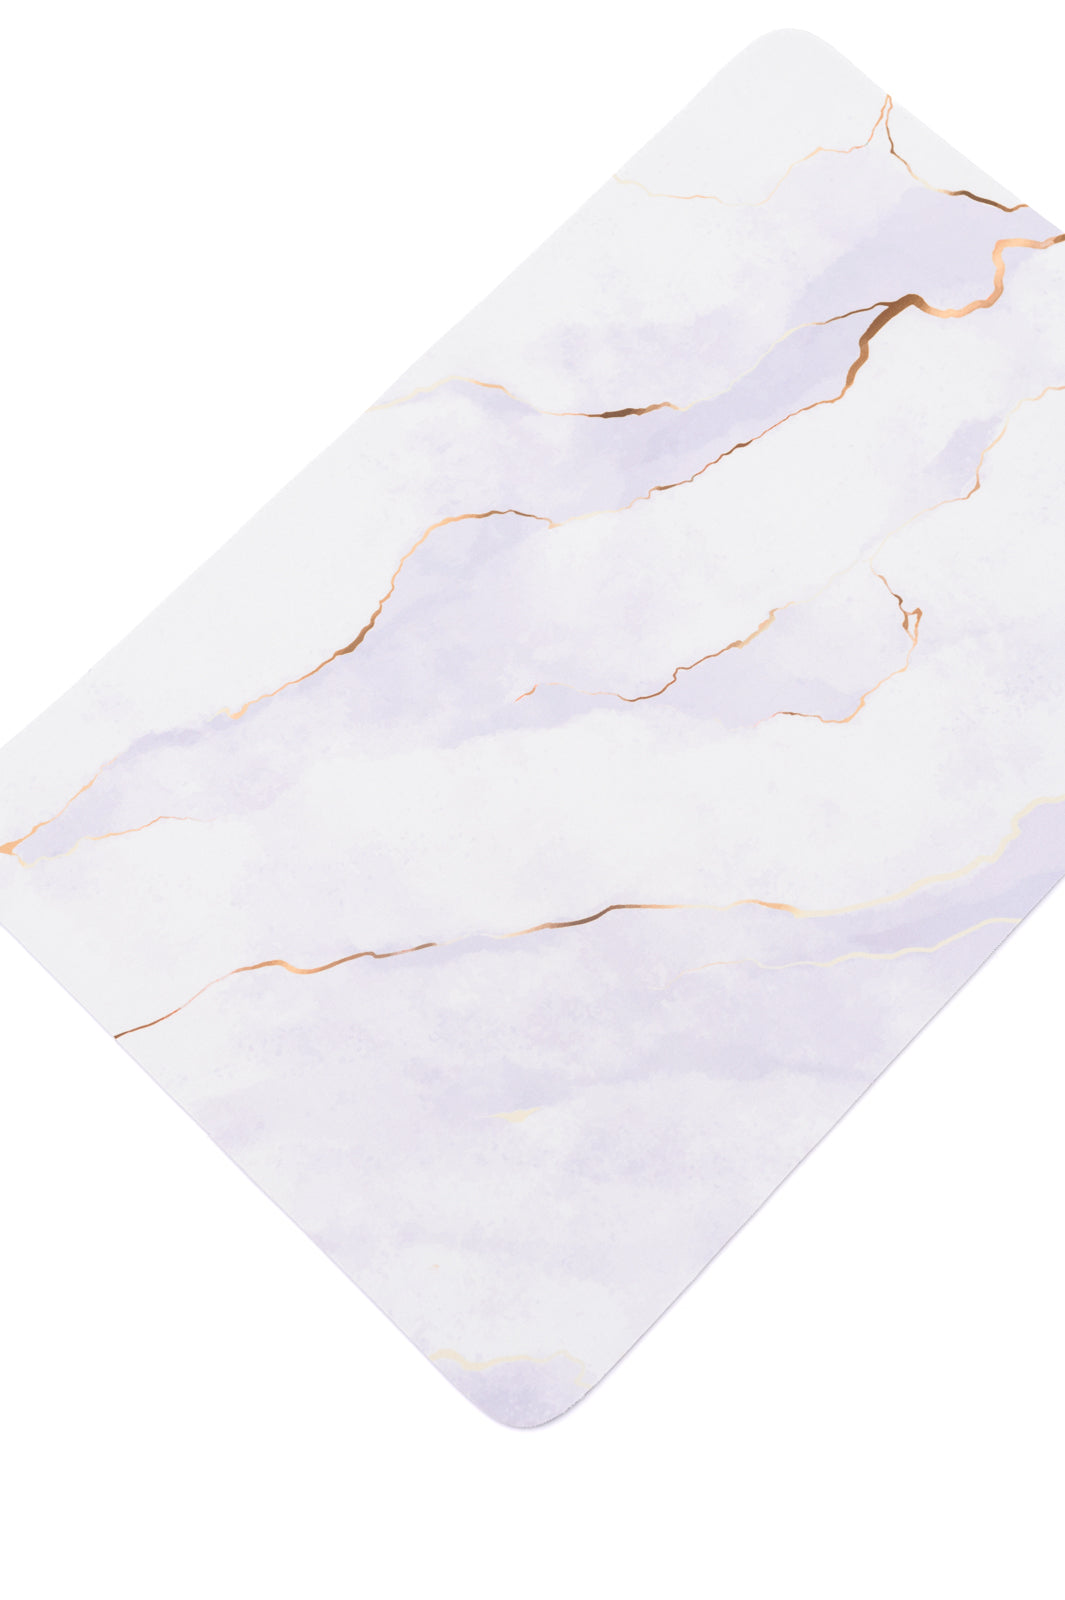 Say No More Luxury Desk Pad | White Marble